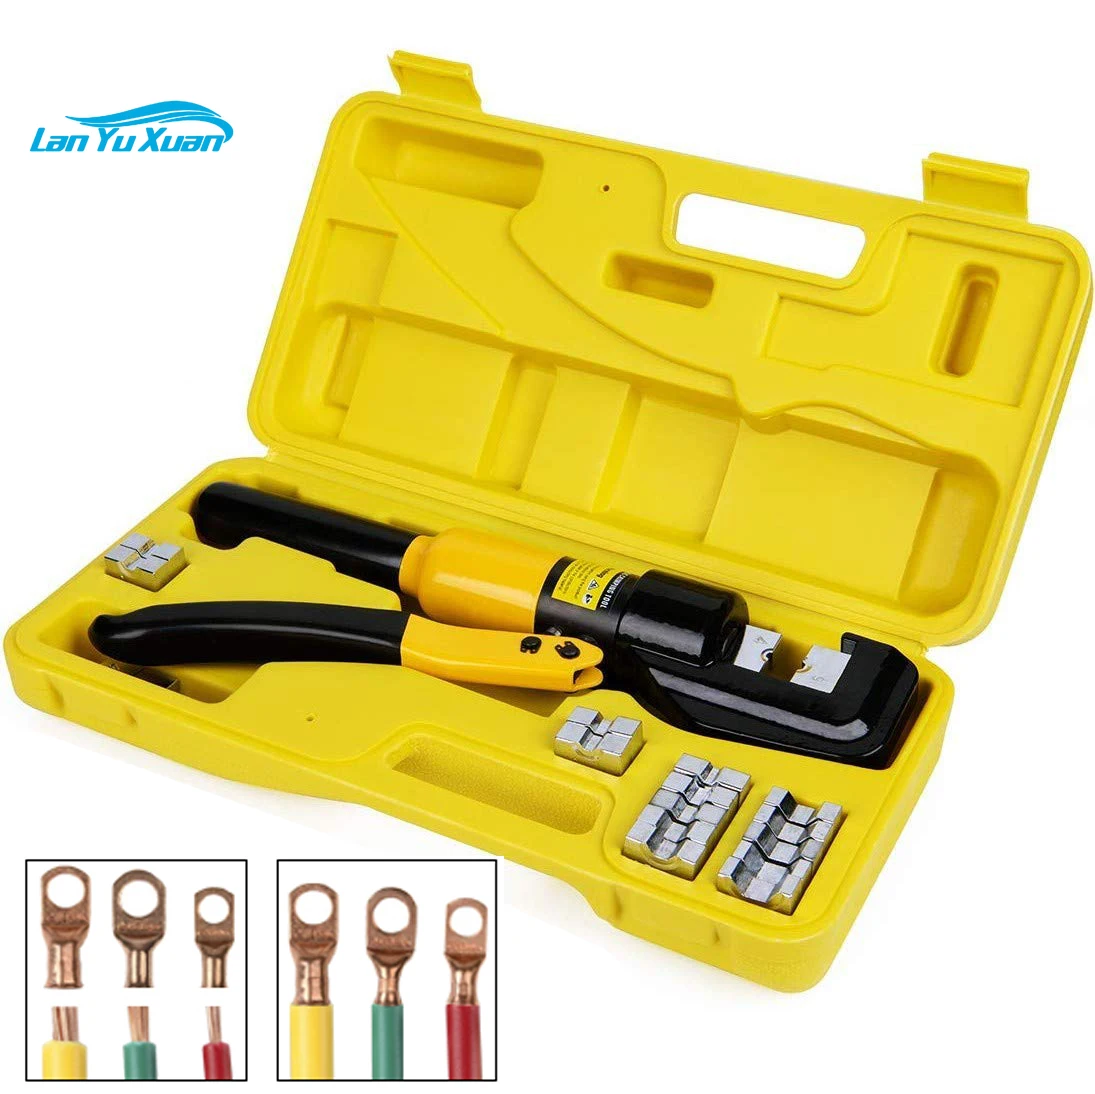 

10 Tons Hydraulic Wire Battery Cable Lug Terminal Crimper Crimping Tool With 9 Pairs of Dies